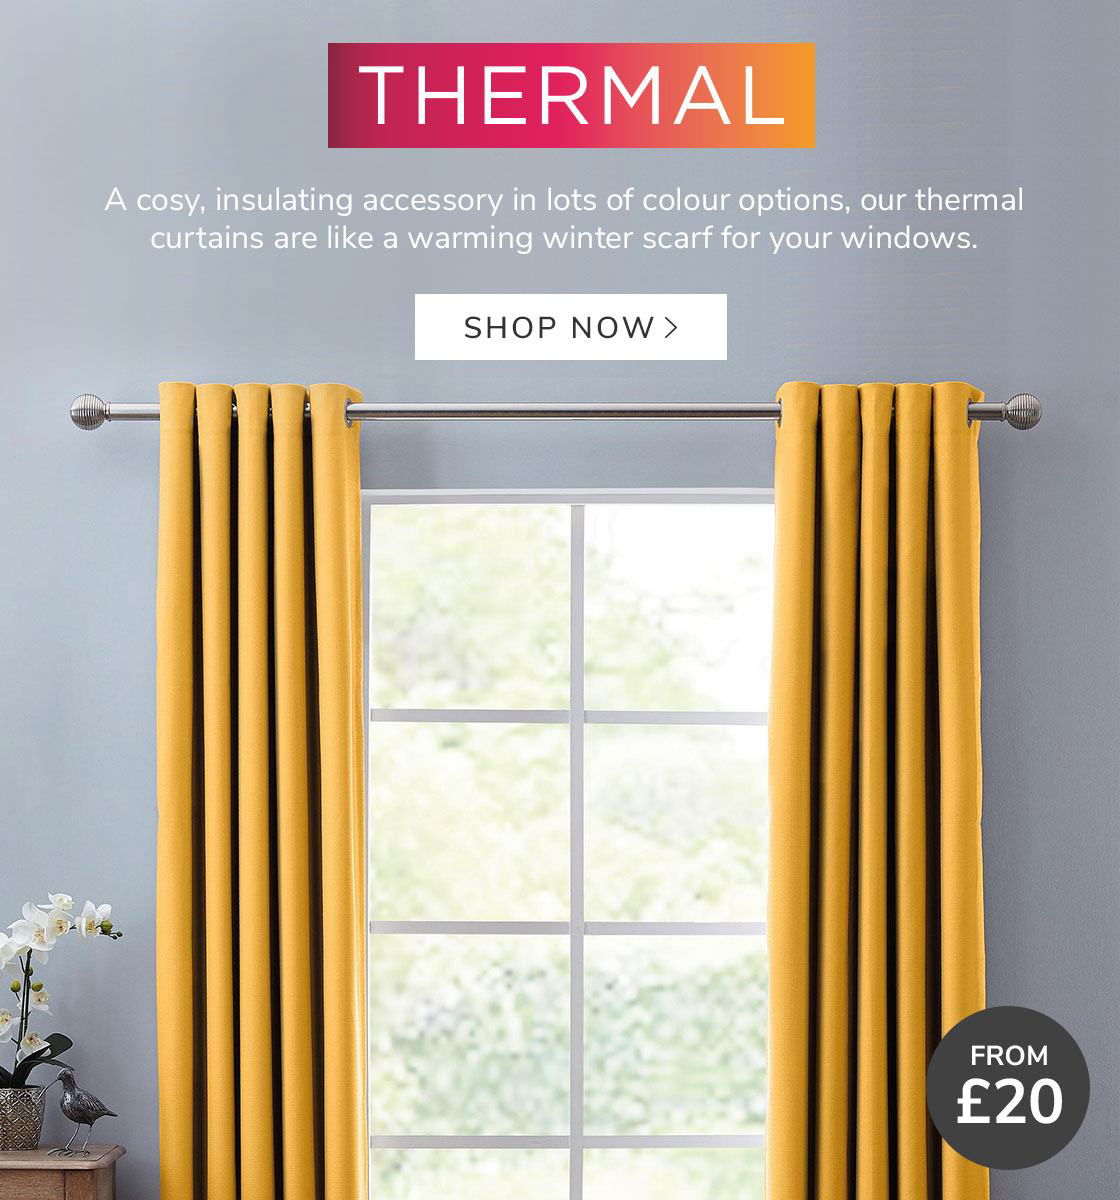 Dunelm: Thermal curtains to keep you cosy | Milled